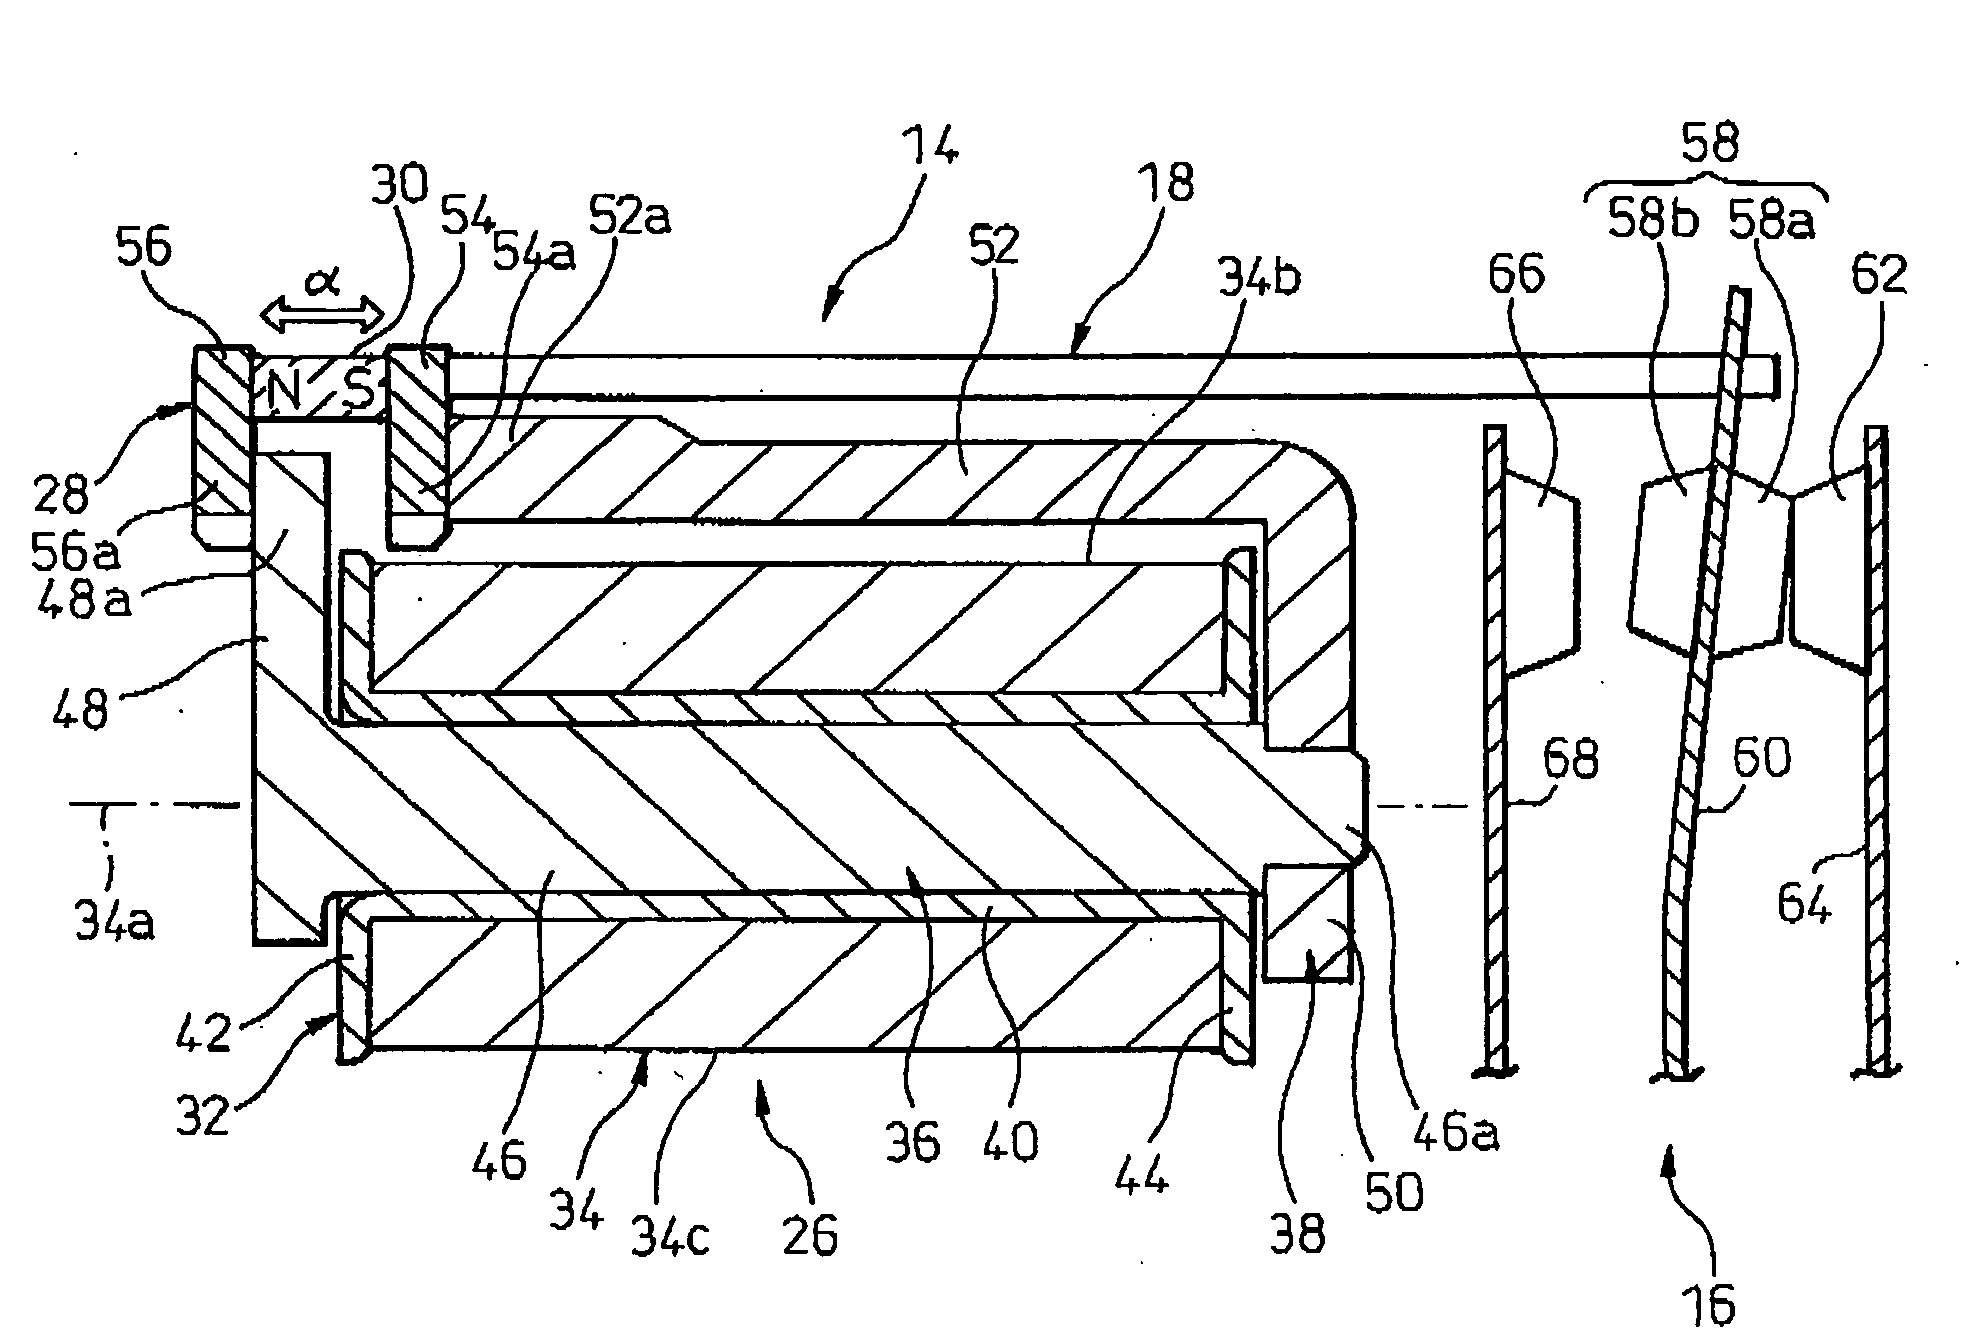 Polarized electromagnetic relay and coil assembly